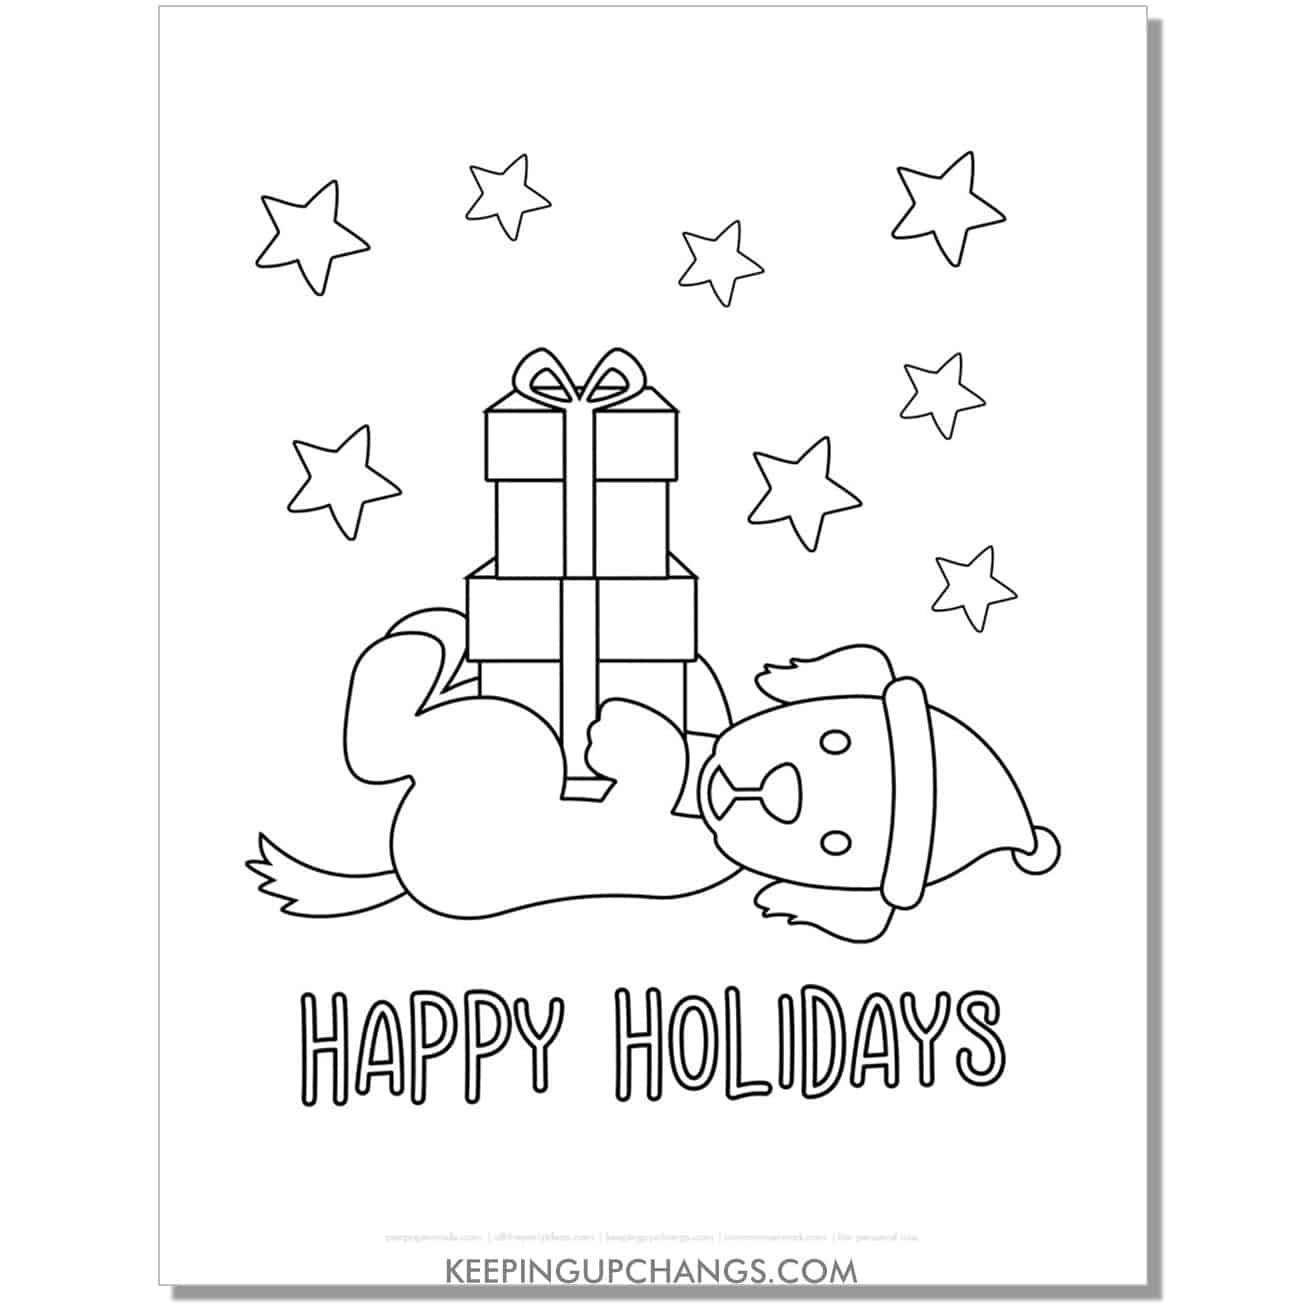 free happy holidays golden retriever with tower of gifts christmas dog coloring page.